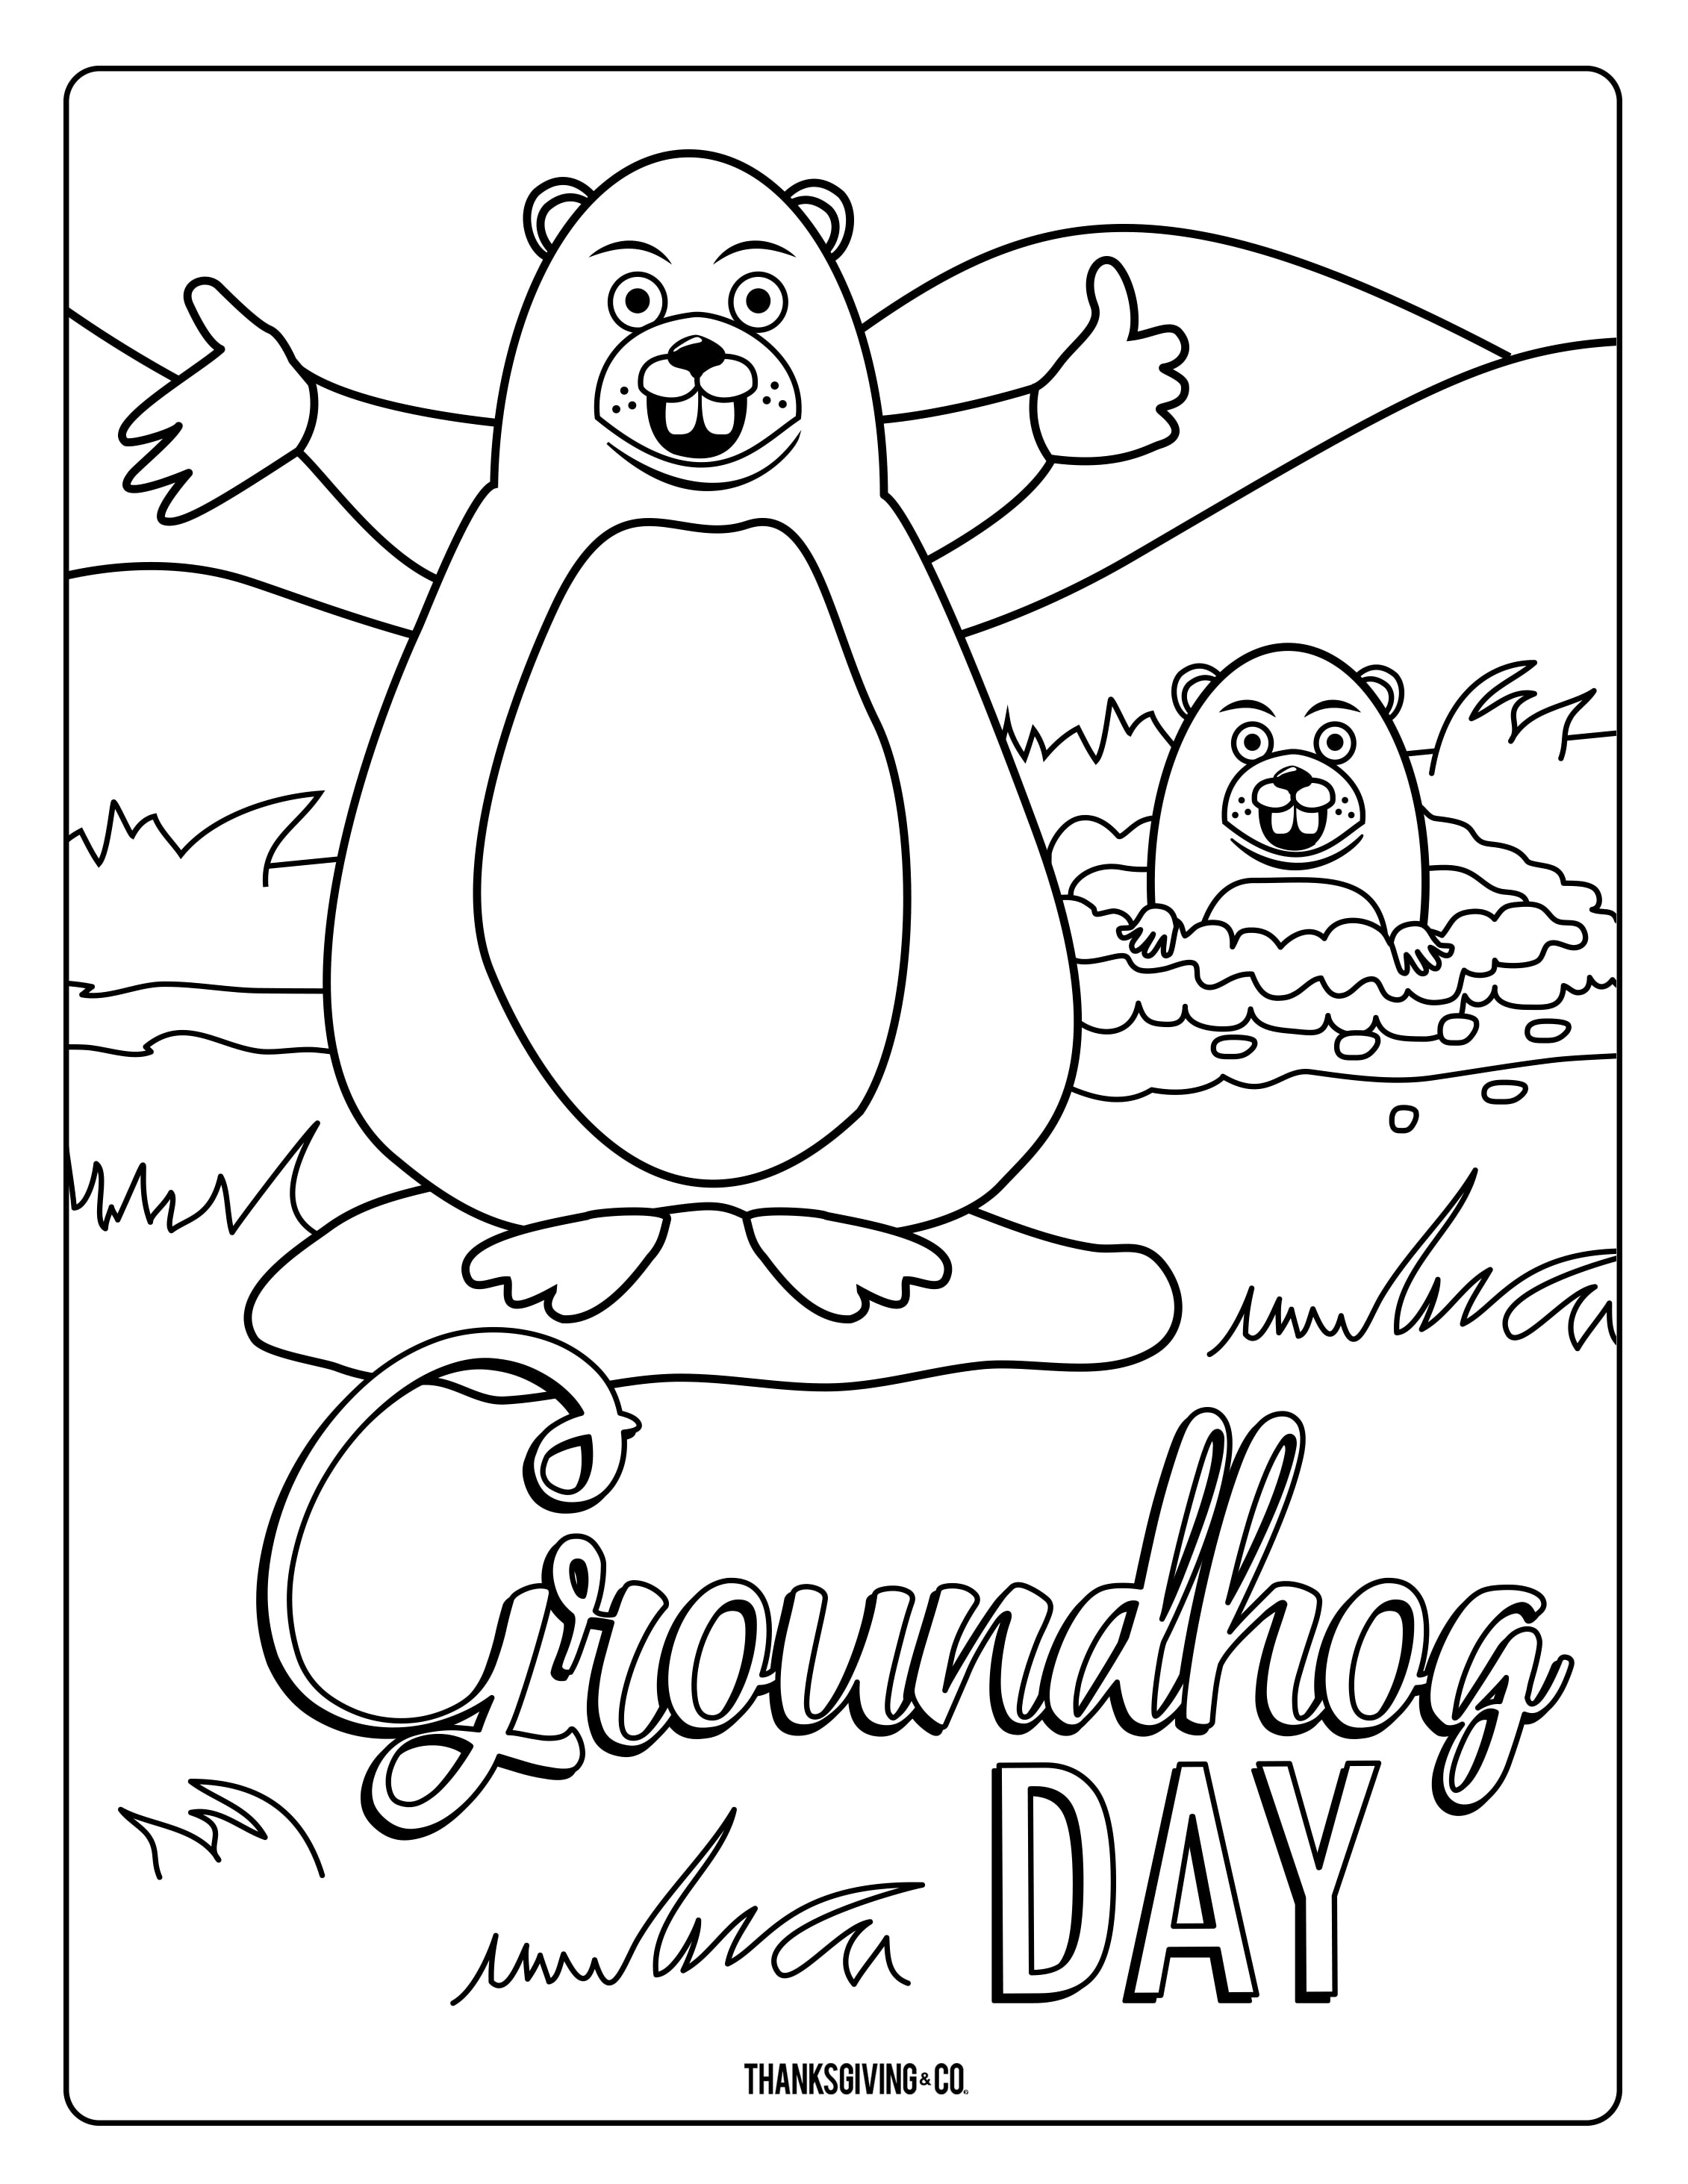 4 Adorable Groundhog Day Coloring Pages For Kids